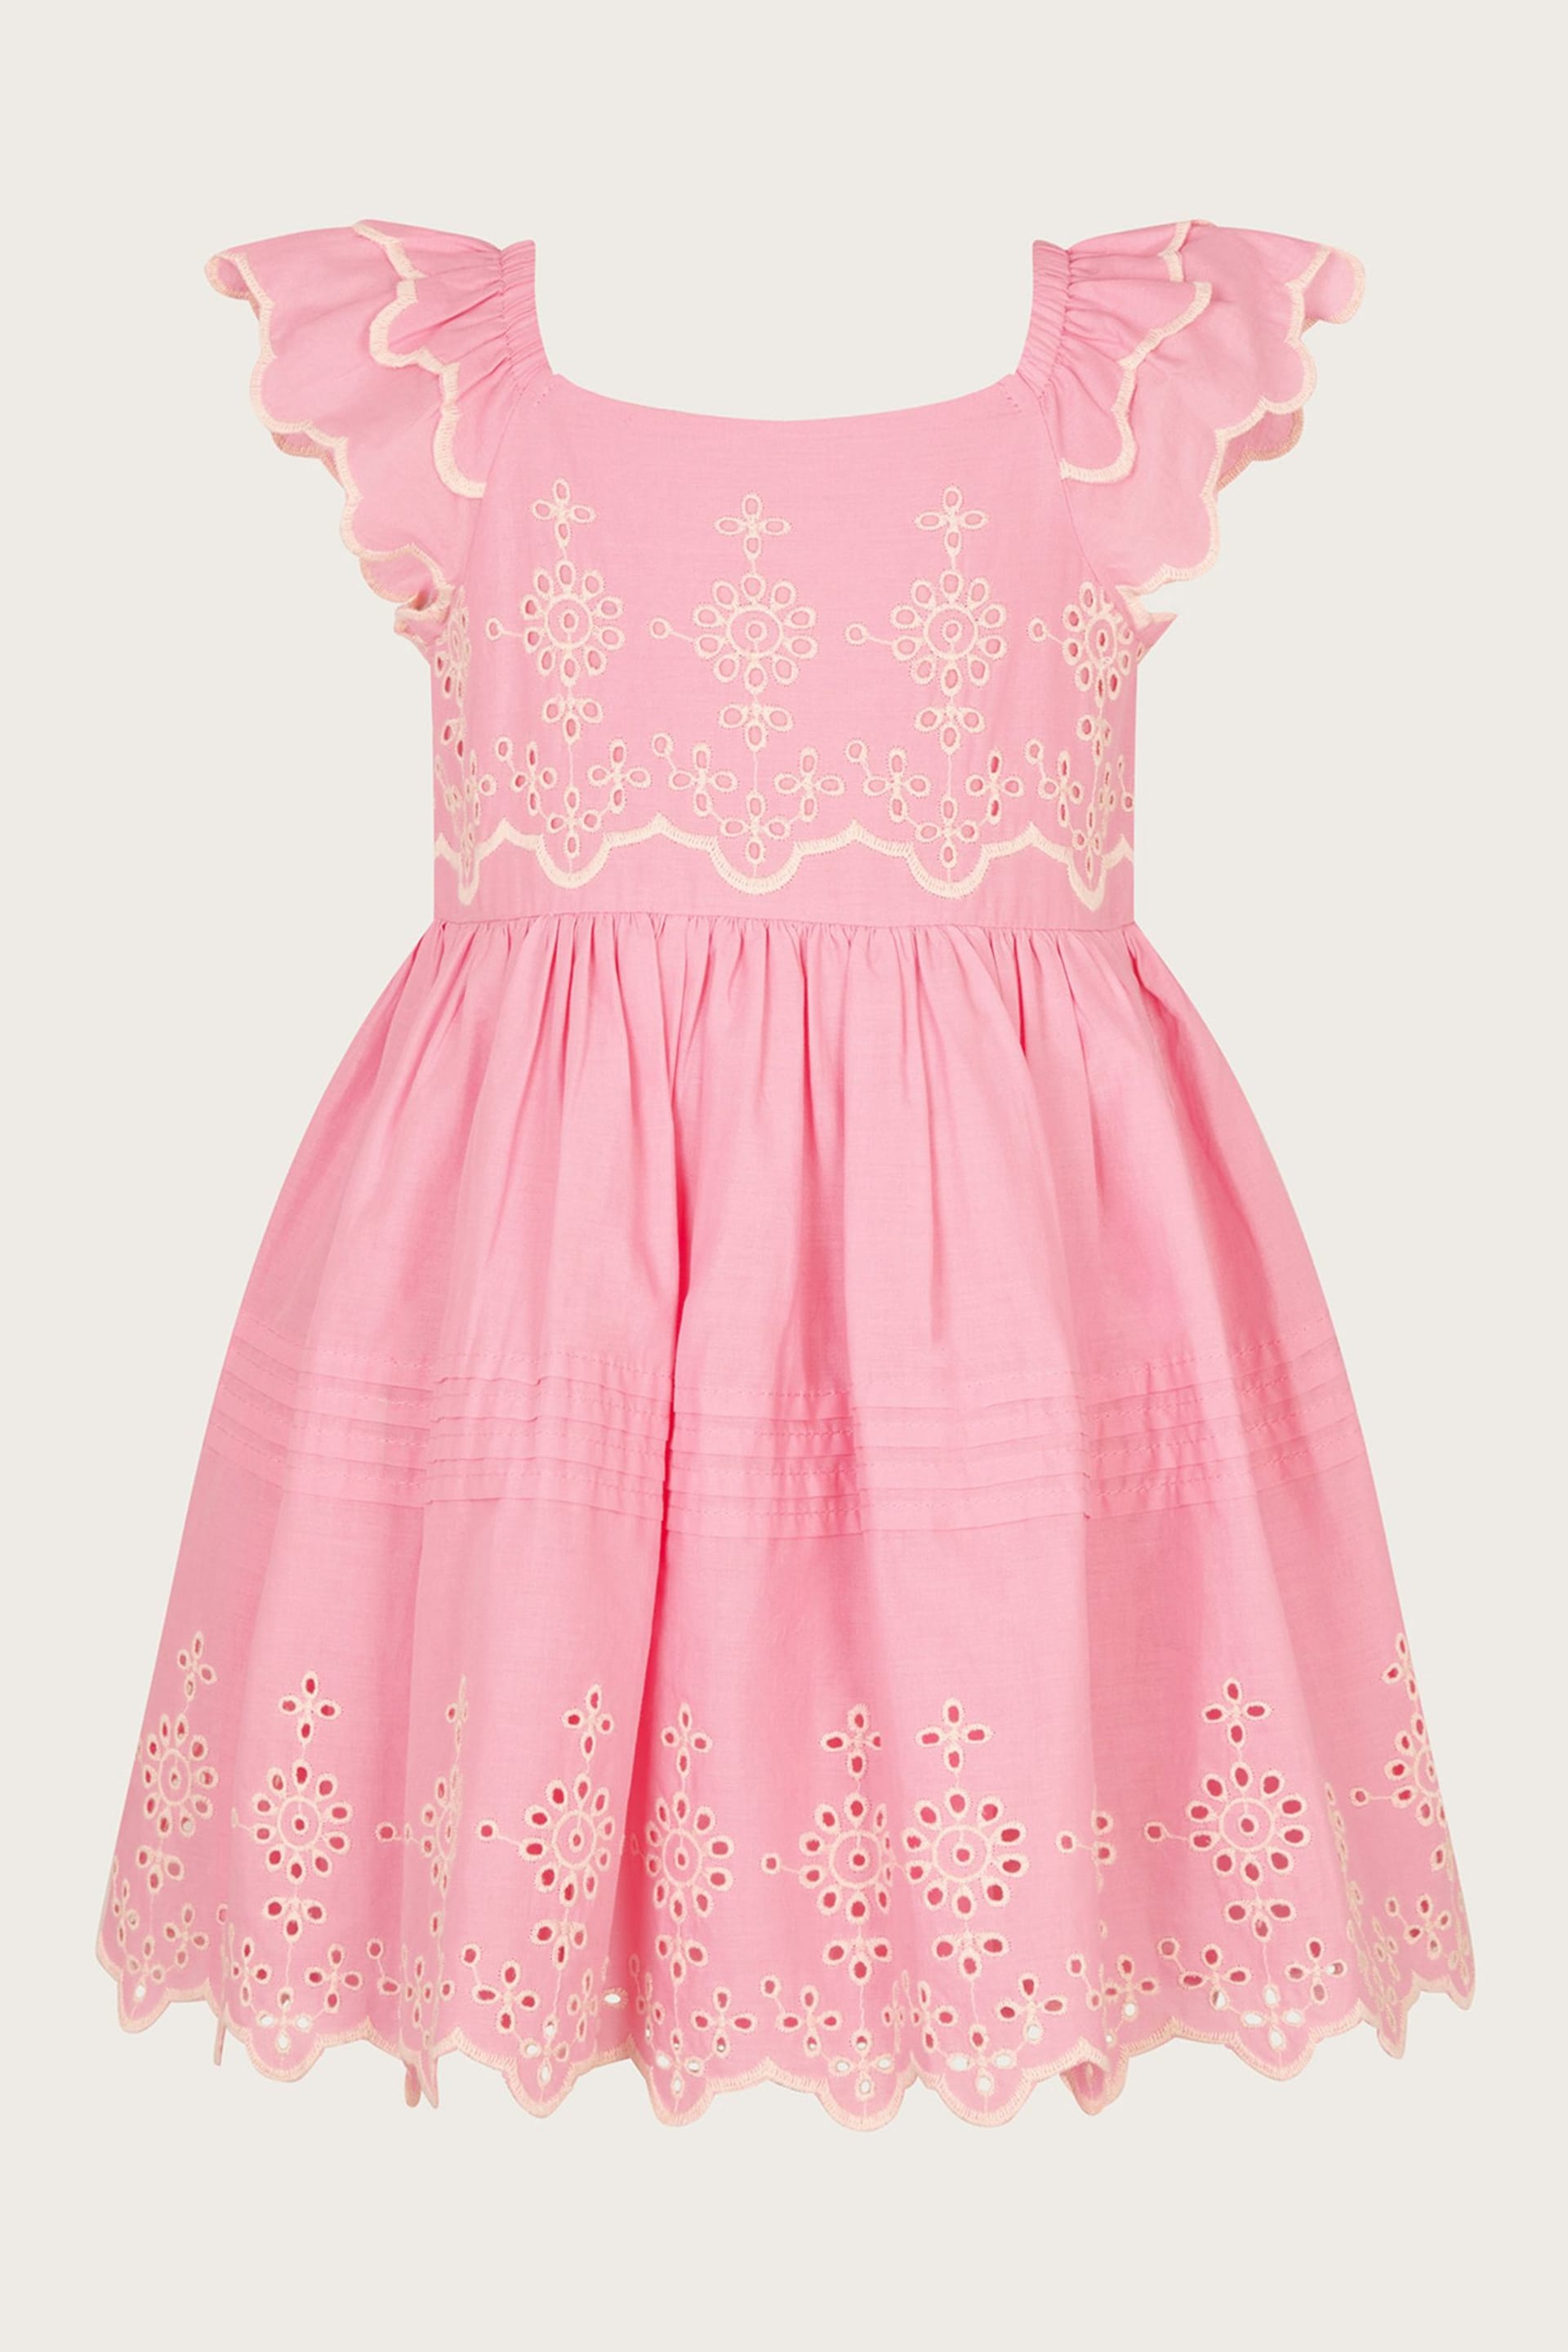 Monsoon Pink Baby Broderie Dress - Image 2 of 4